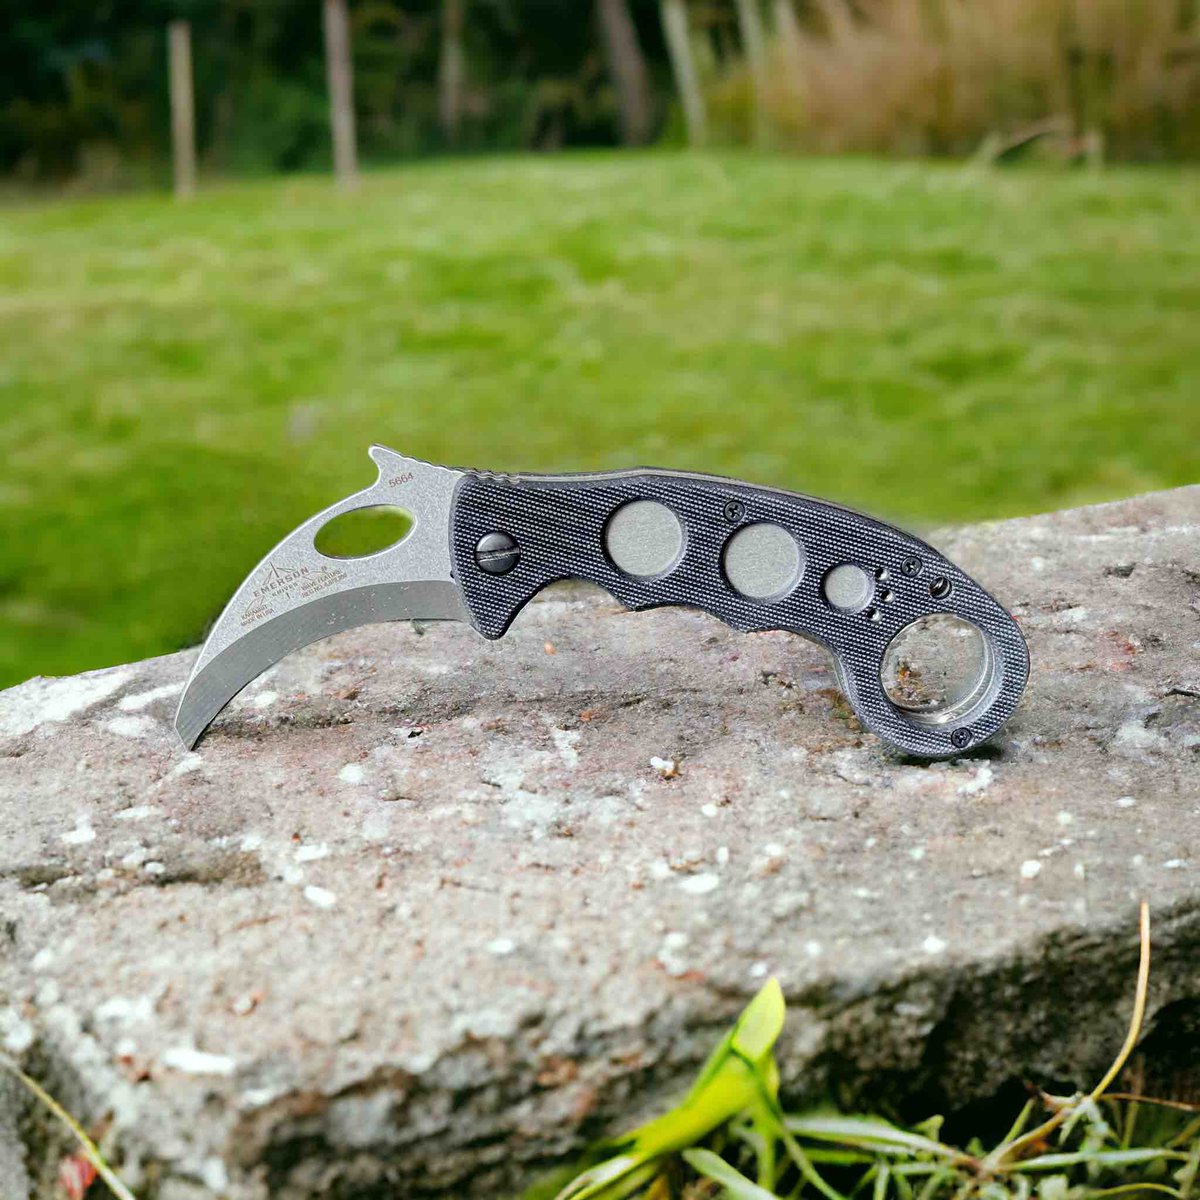 Precision-crafted for ultimate control and versatility. #emersonknives #karambit #madeintheusa